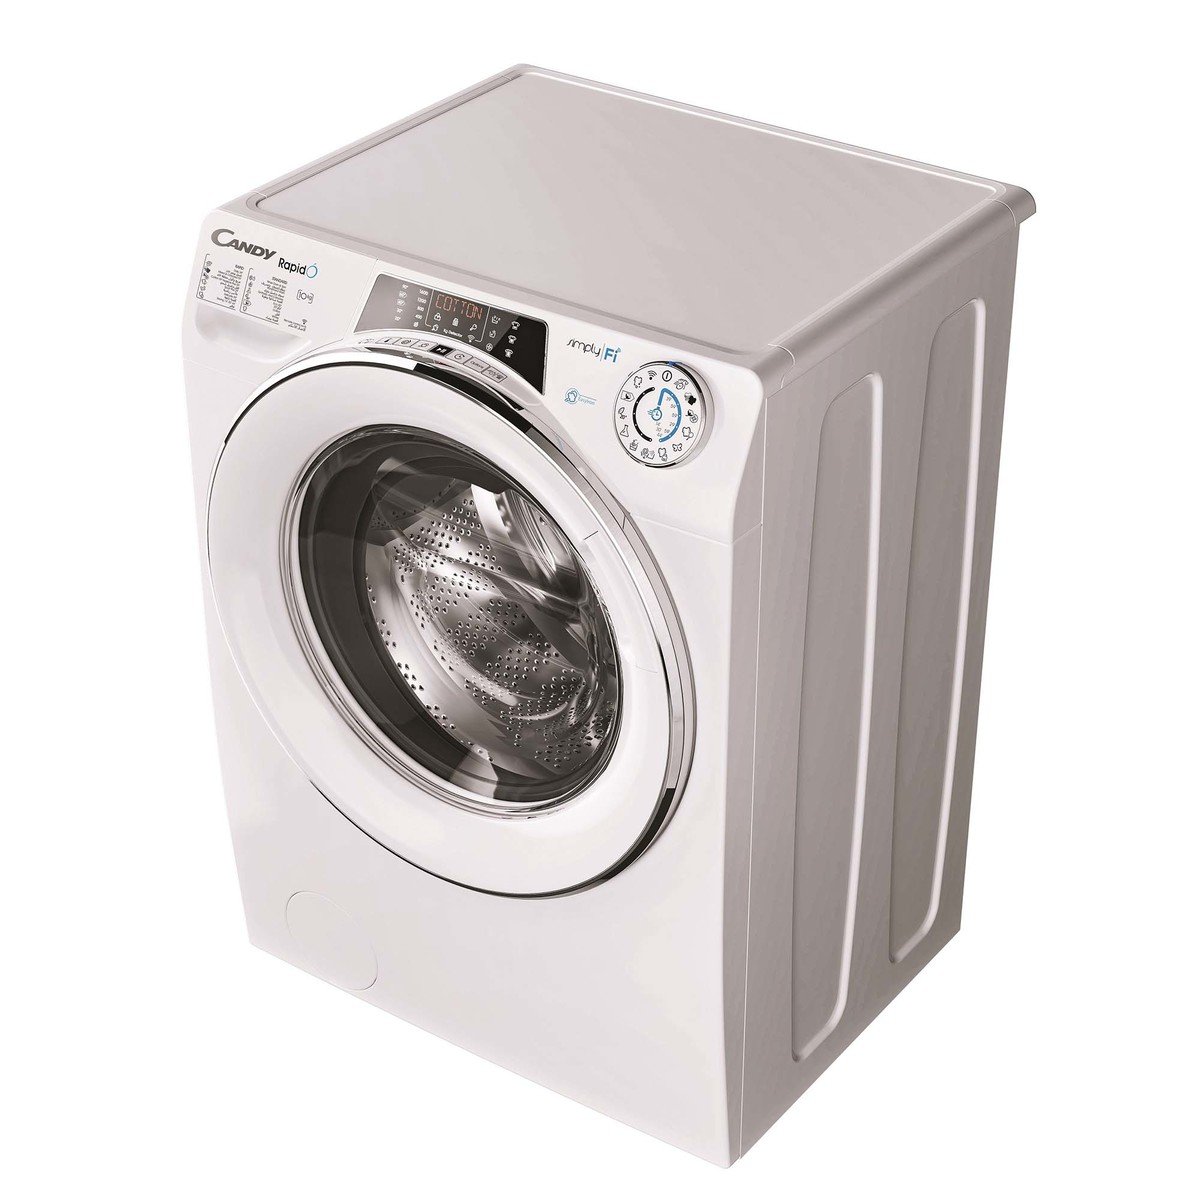 Candy Front Load Washing Machine RO16106DWHC7-19 Rapido 10KG